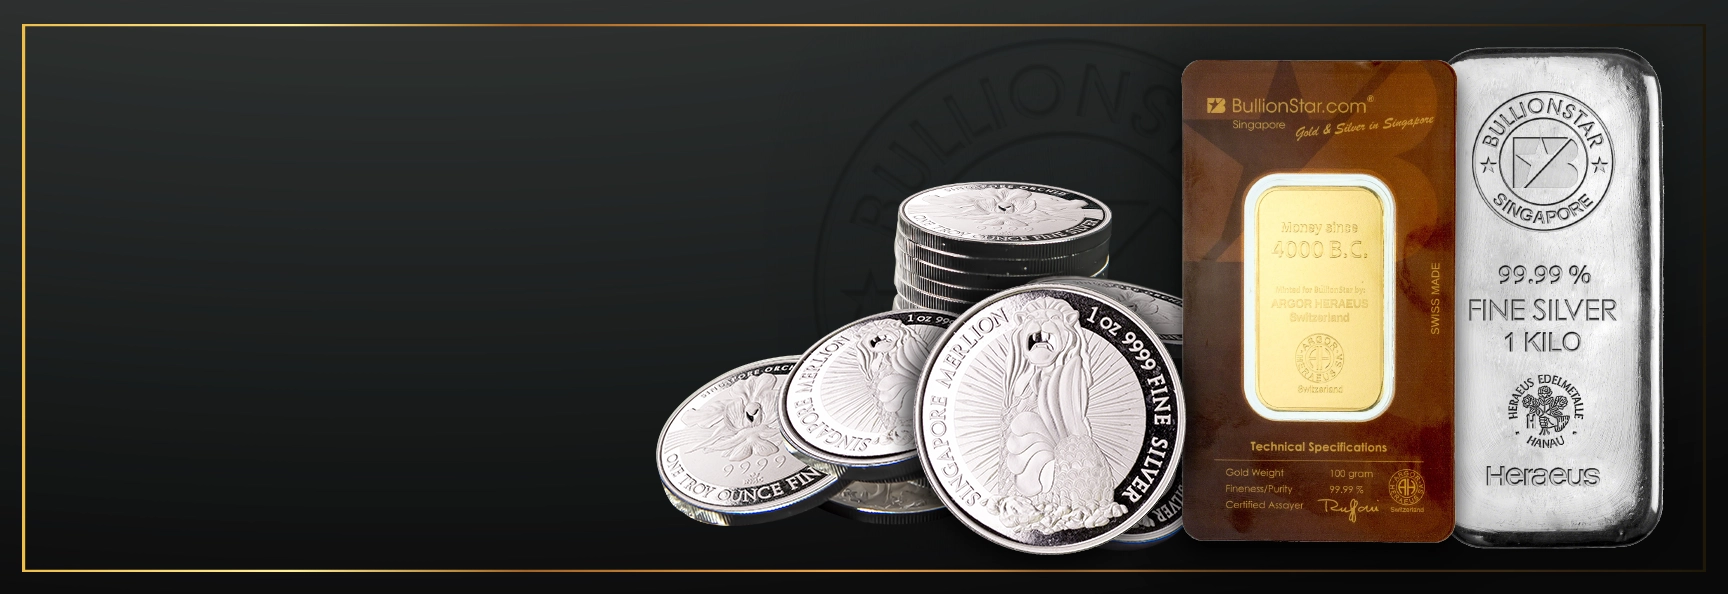 No/Low Spread Products! Enjoy great savings on our no spread  BullionStar Gold & Silver Bars and  Low Spread Silver Merlion!